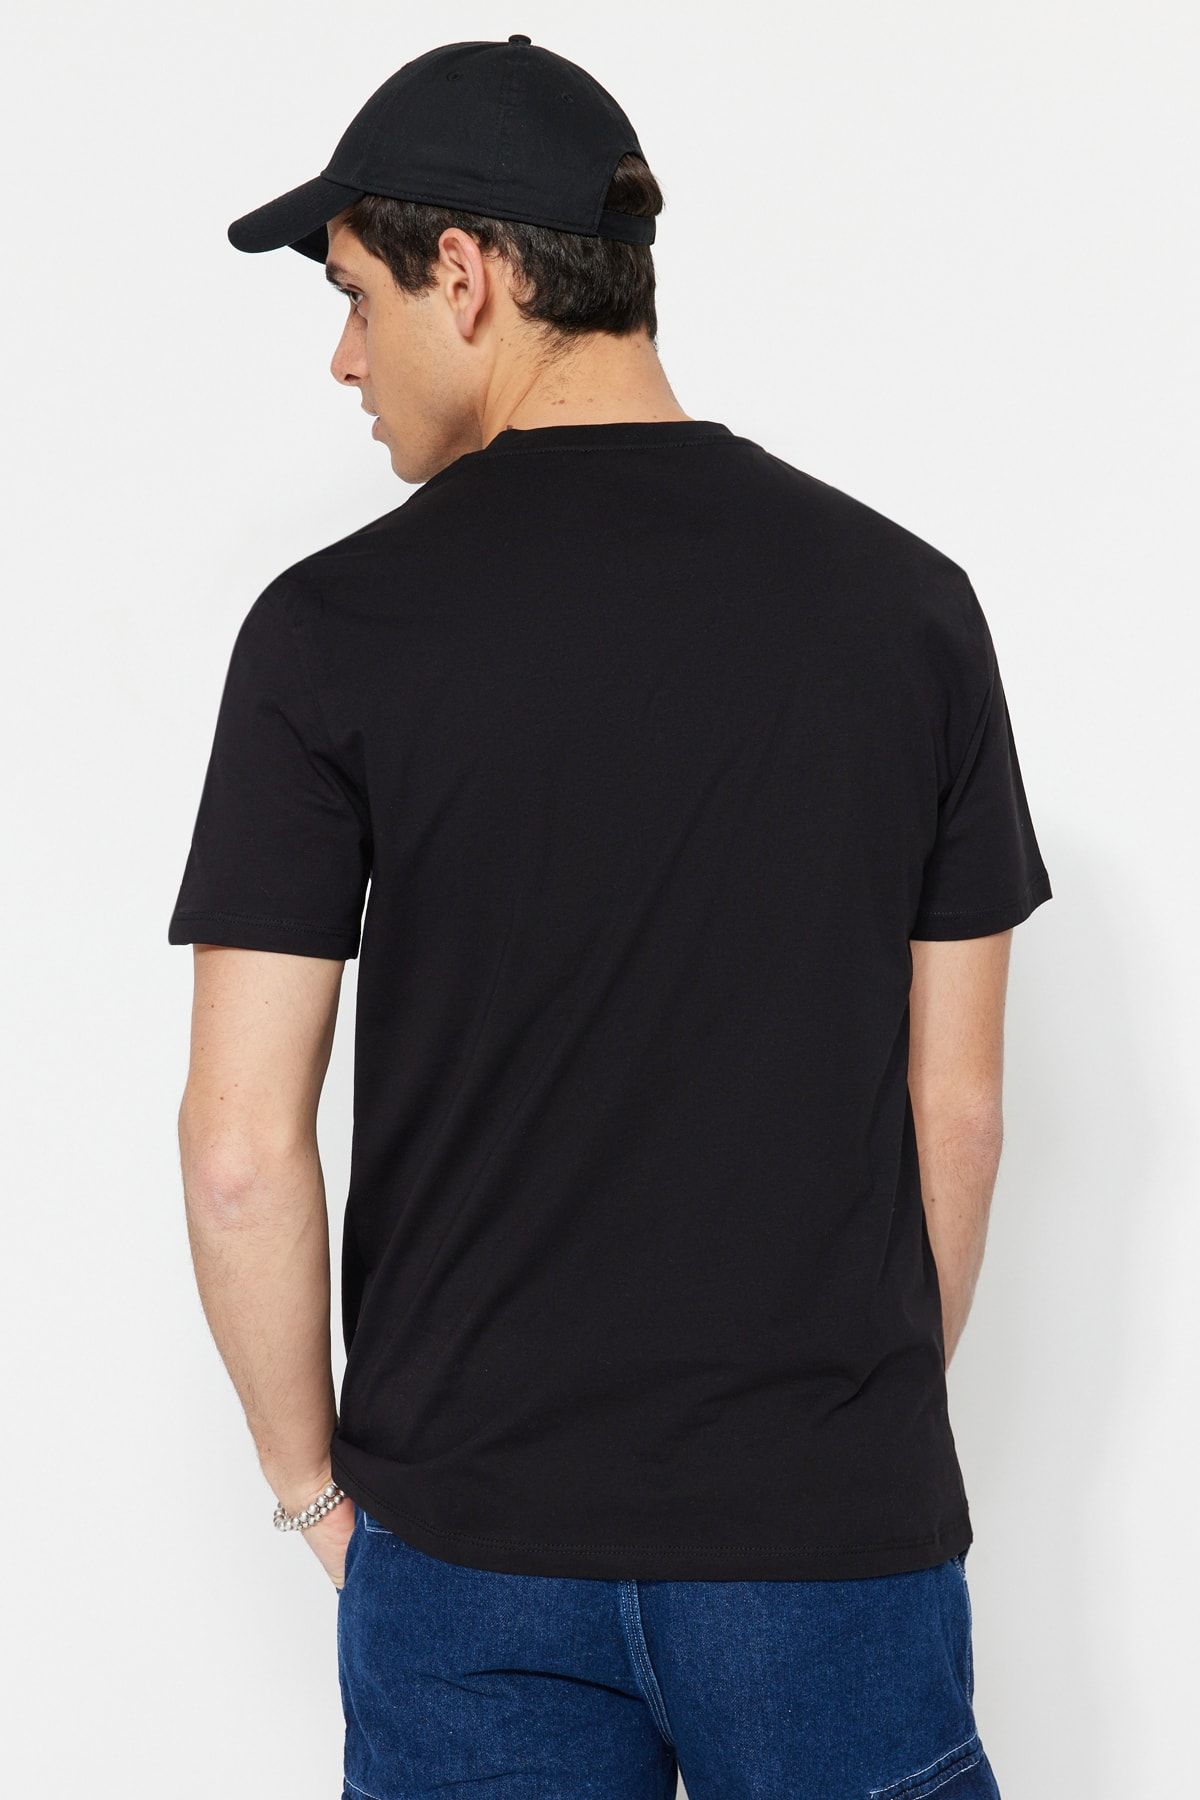 Black Fitted T-Shirt Unlock Your Journey, 58% OFF